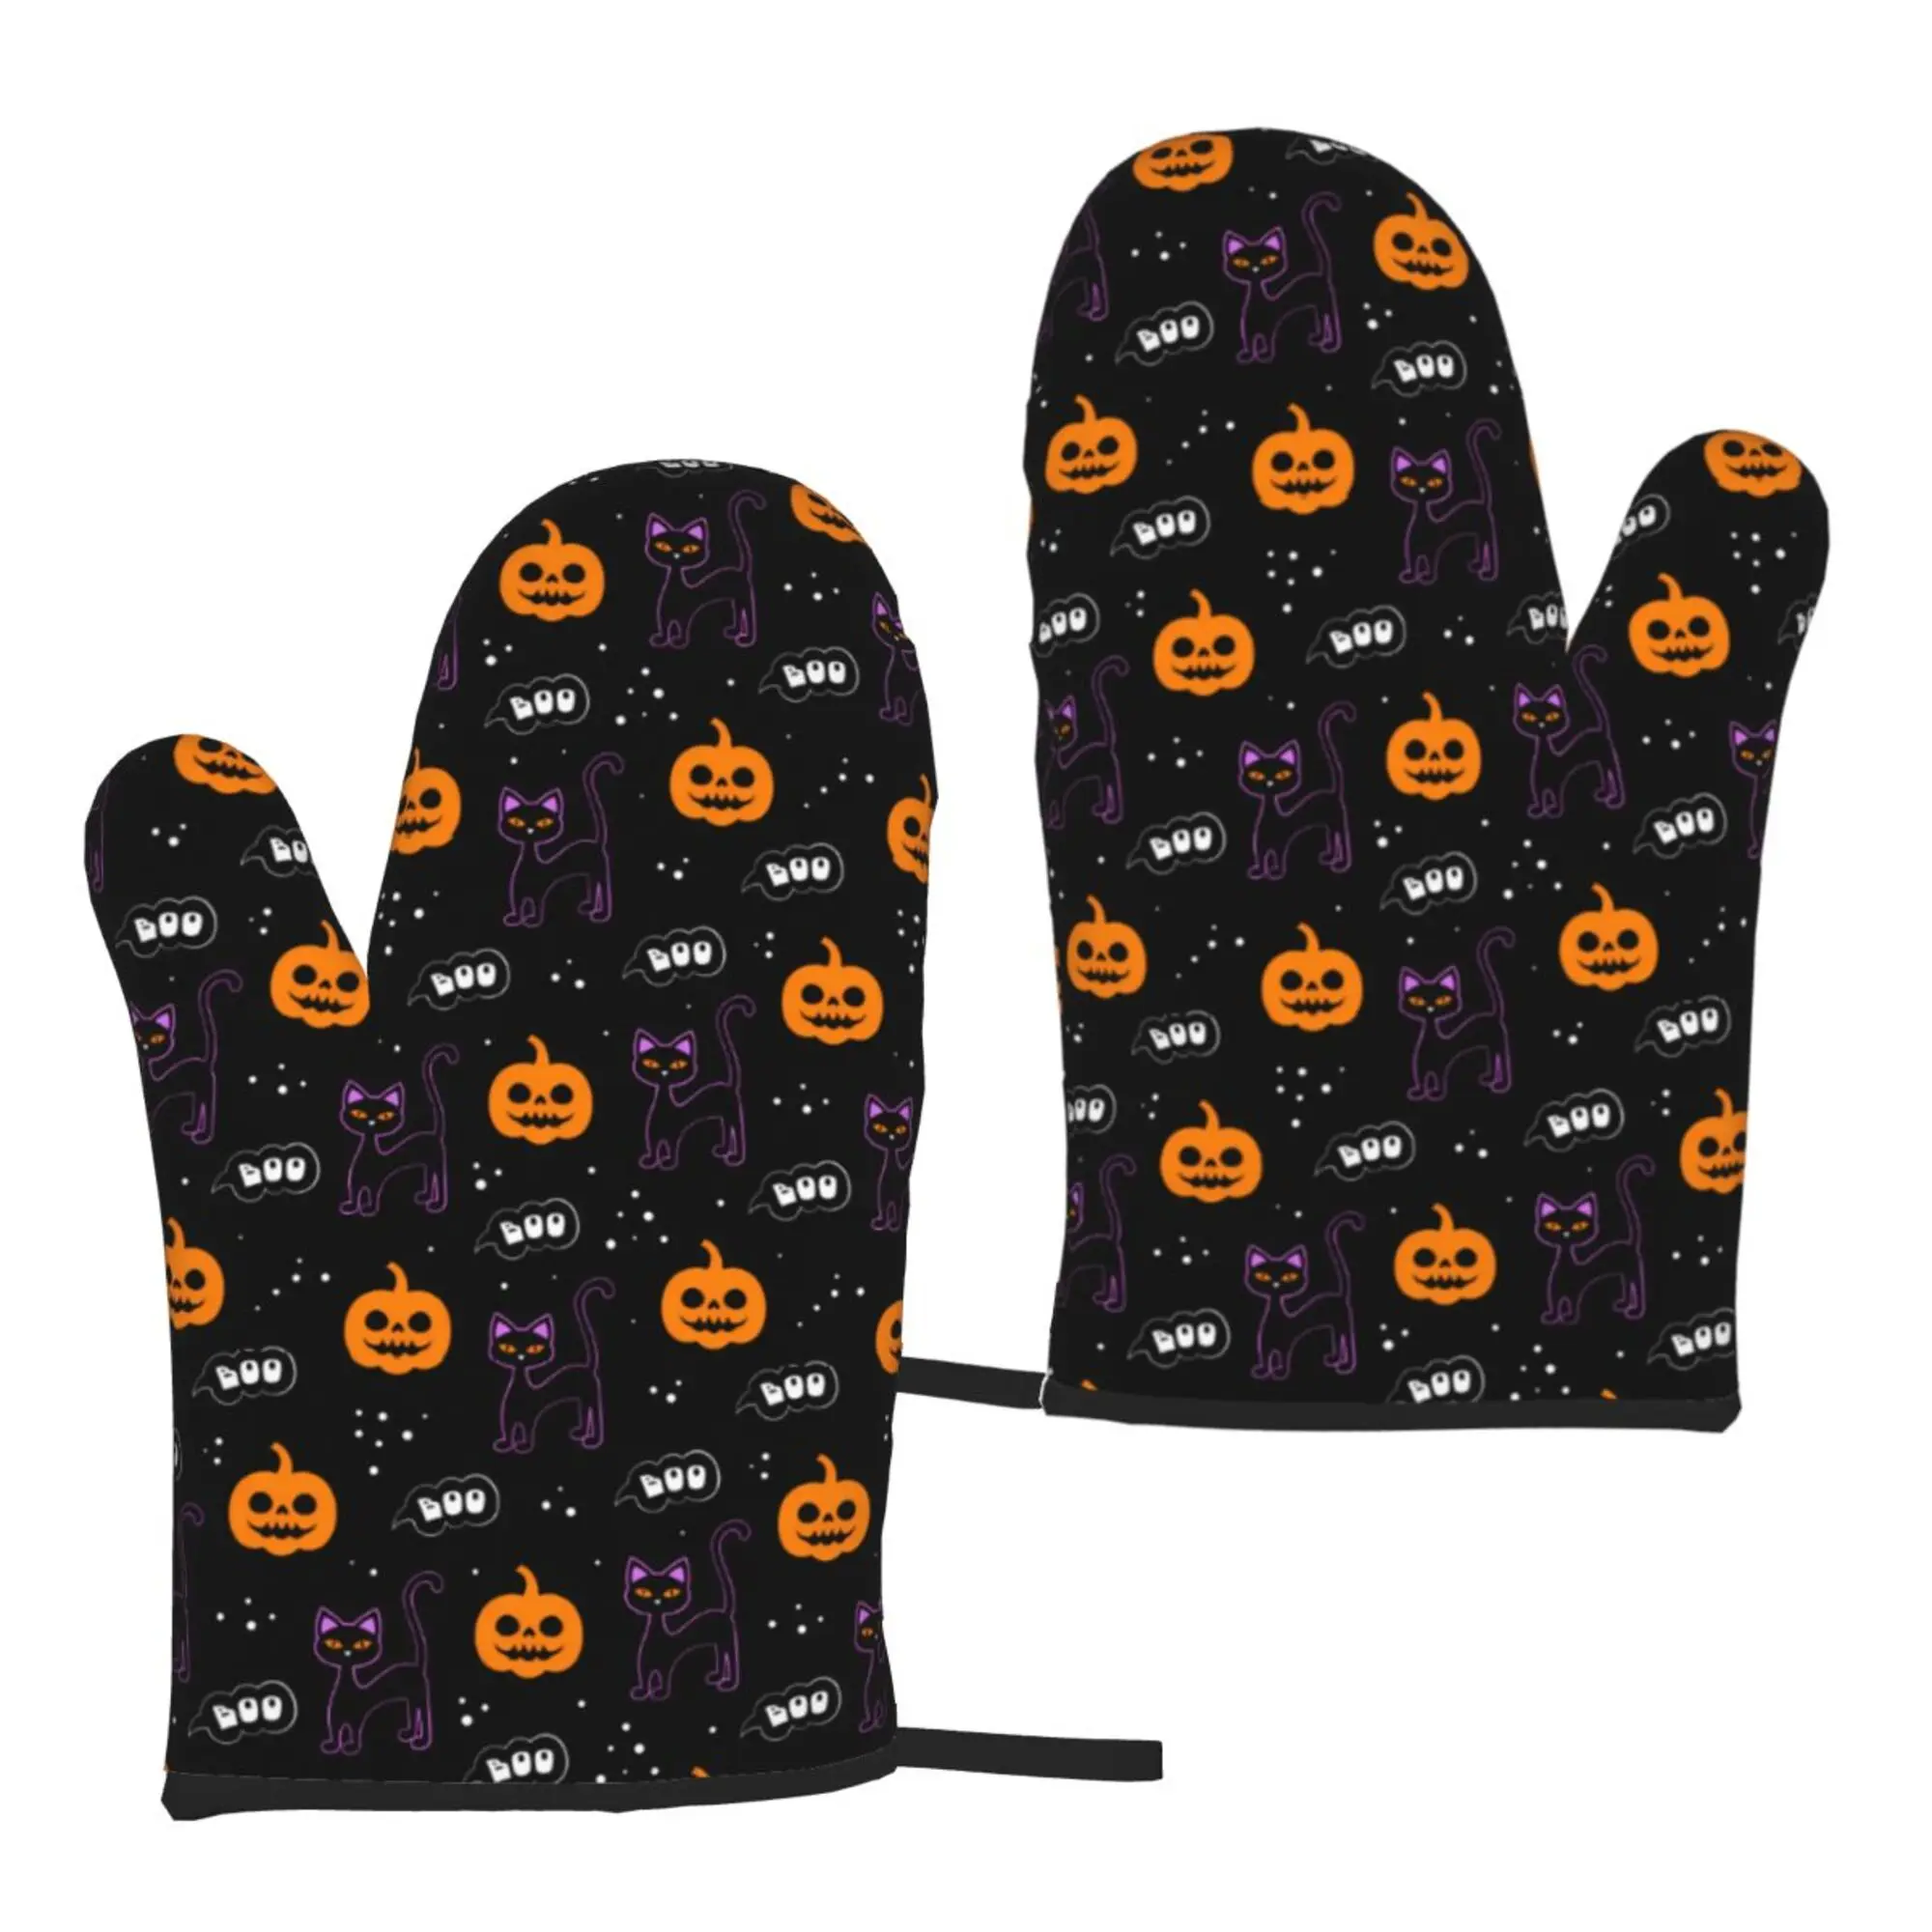 Black Cat Boo Pumpkin Halloween Oven Mitts 2pc Microwave Gloves Bbq Cooking Gloves Heat Resistant Kitchen Gloves One Size cooking non slip heat kitchen potholder baking microwave oven silicone gloves household gloves gloves oven mitts